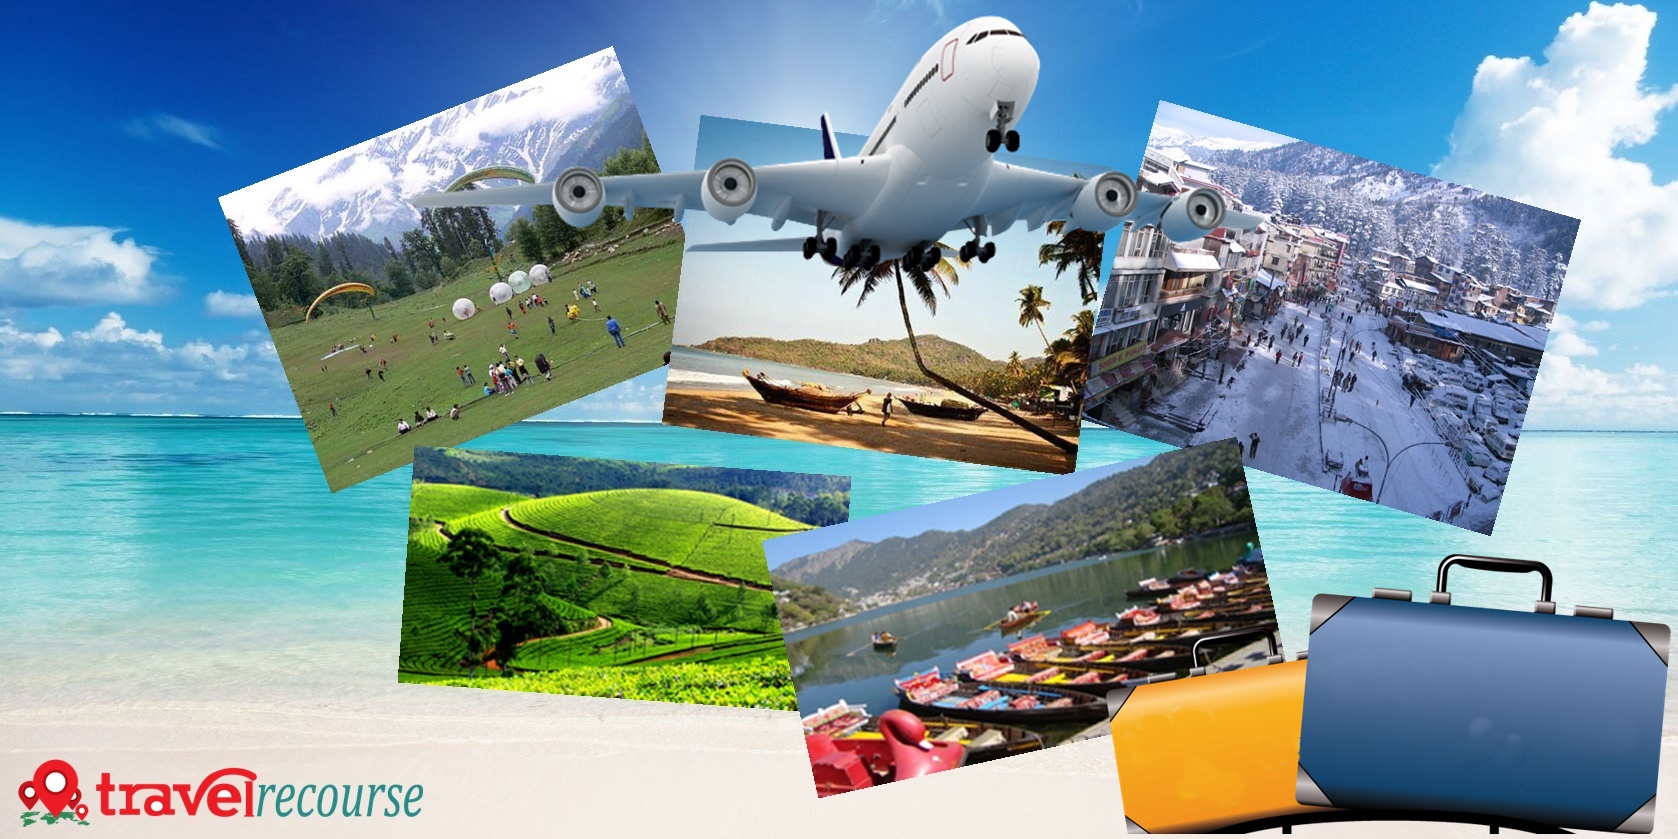 Destination package. Travel package. Package Holiday. Travelling package. Travel agent package.